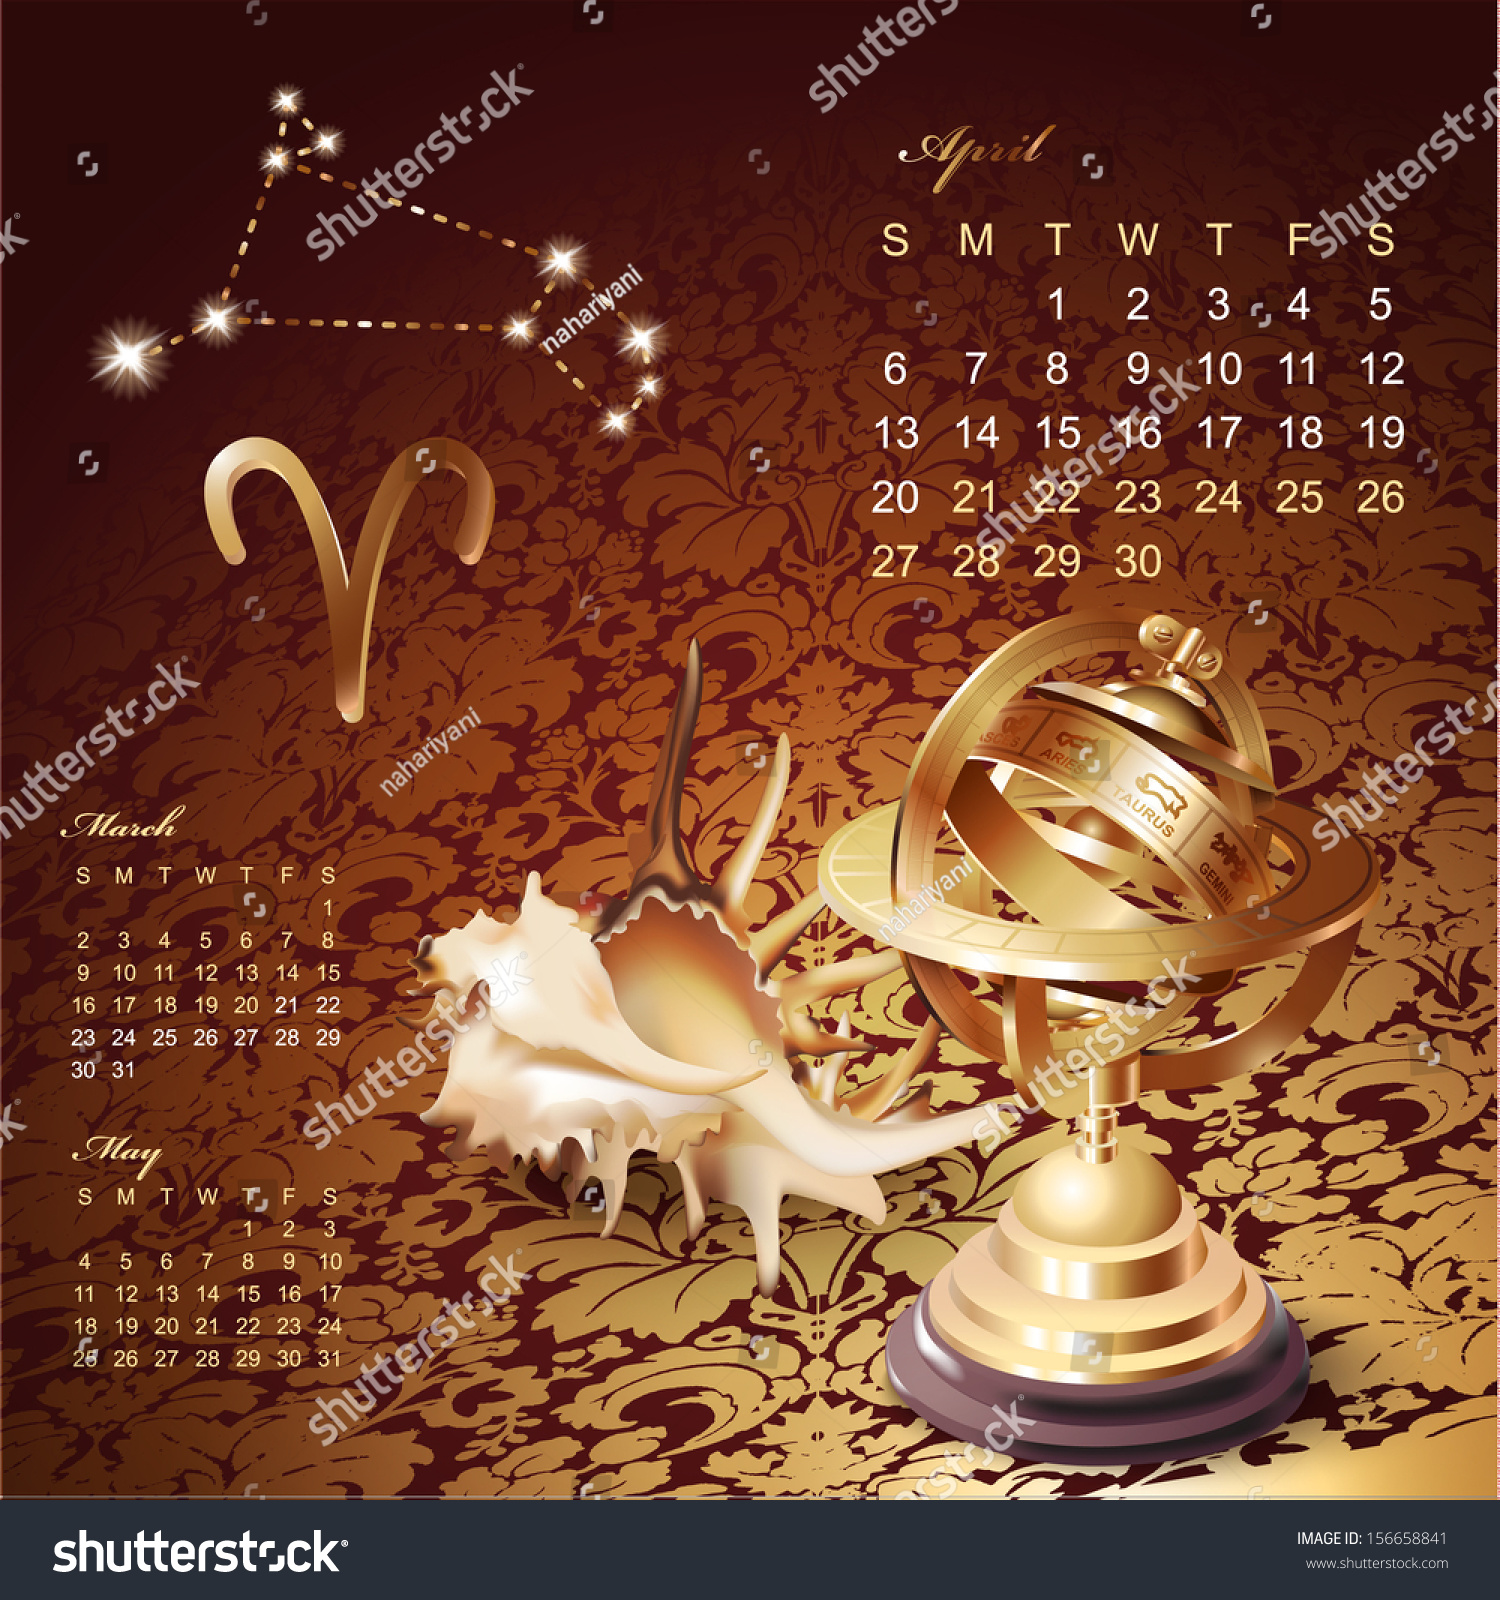 Artistic 2014 Daily Calendar With Zodiac Signs And Astrology Design ...